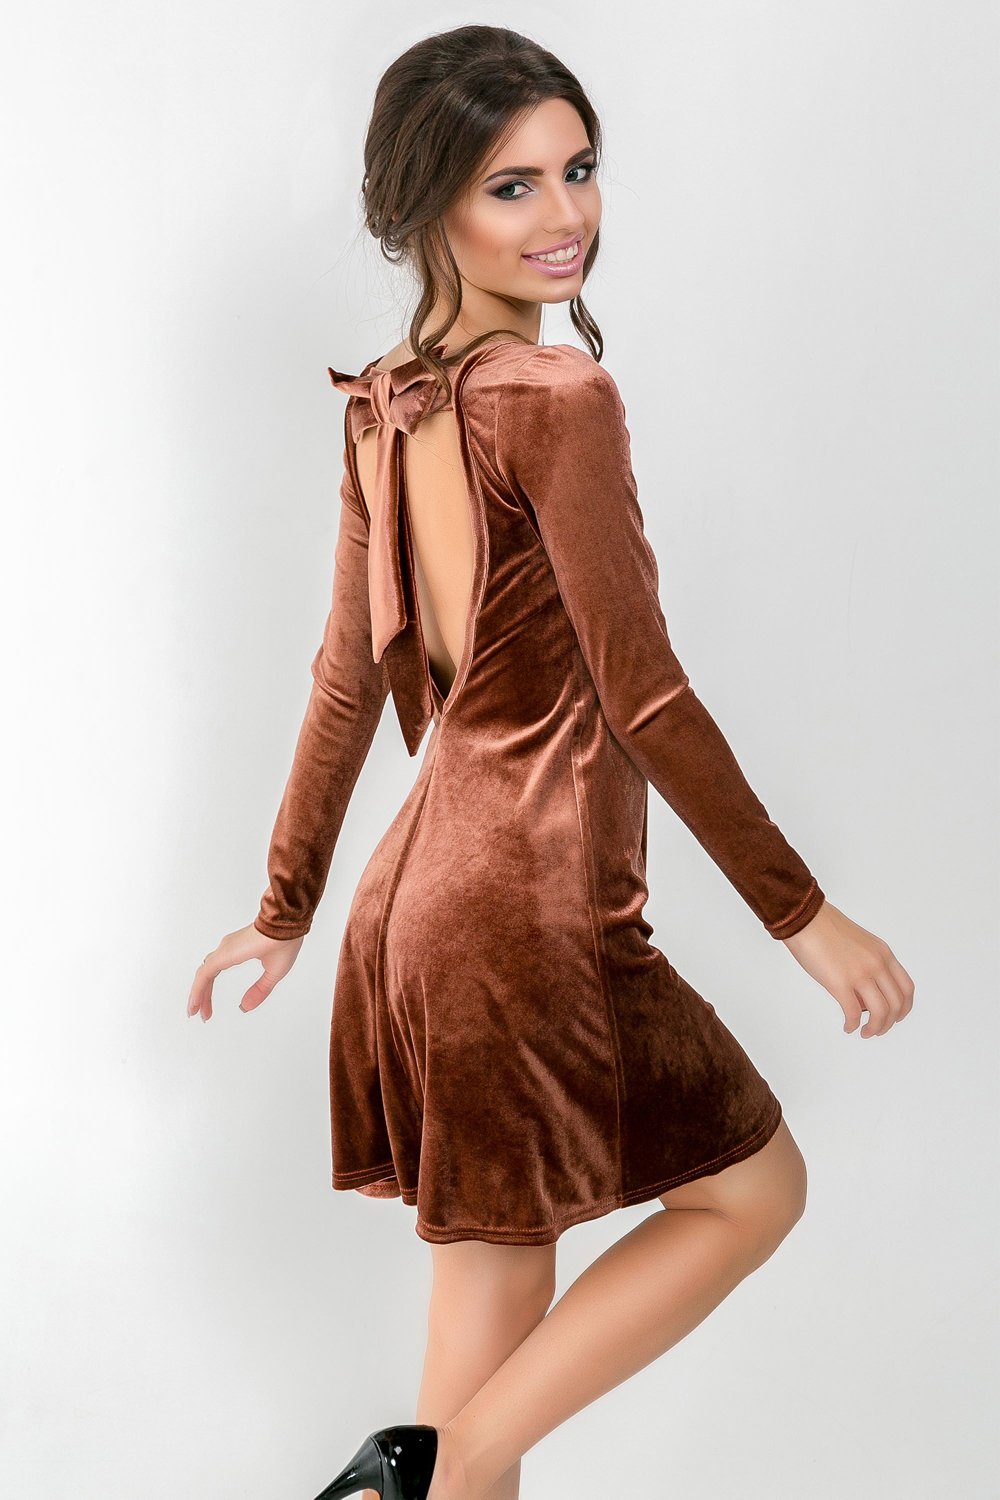 Velour dress with cut-out back and bow in bronze